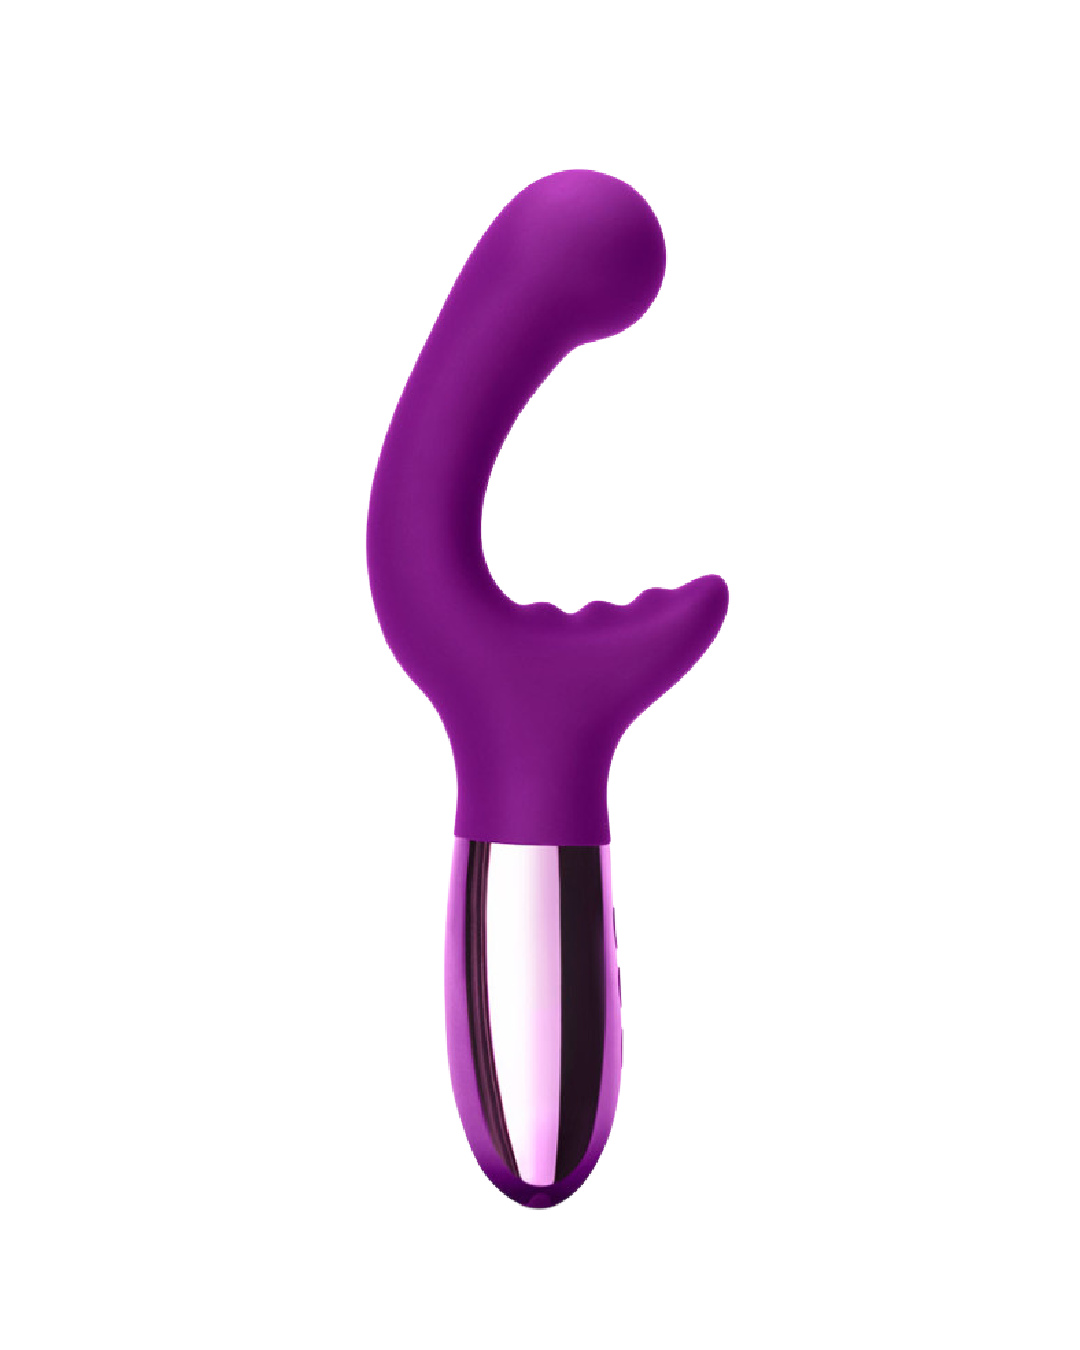 Le Wand XO Double Motor Internal and External Vibrator - Dark Cherry side view of the curve